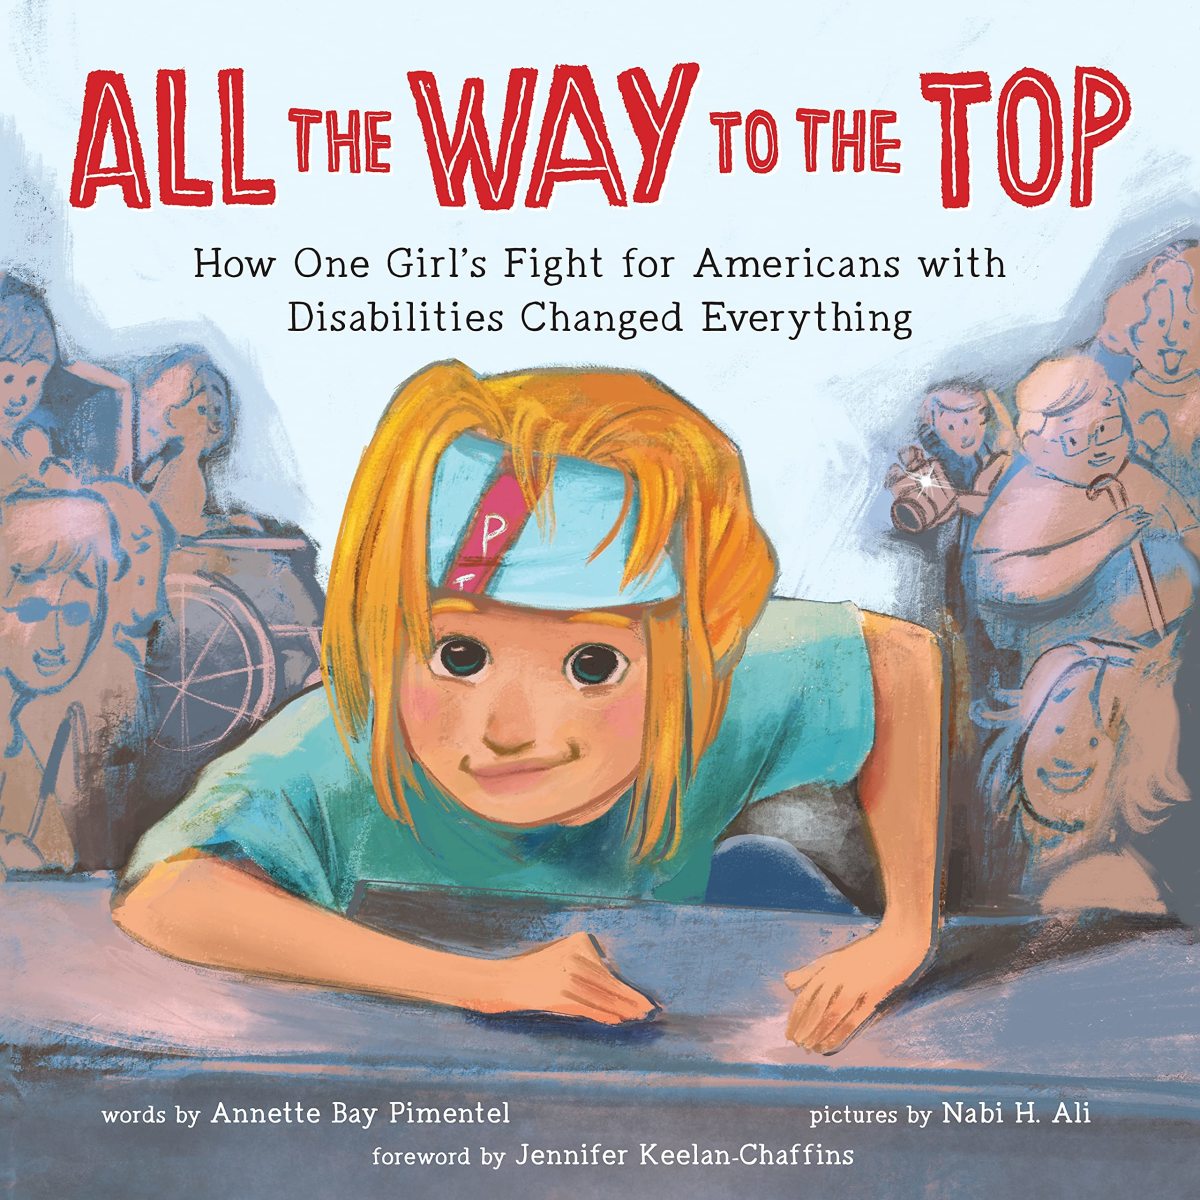 All the Way to the Top: How One Girl’s Fight for Americans With Disabilities Act Changed Everything by Annette Bay Pimentel